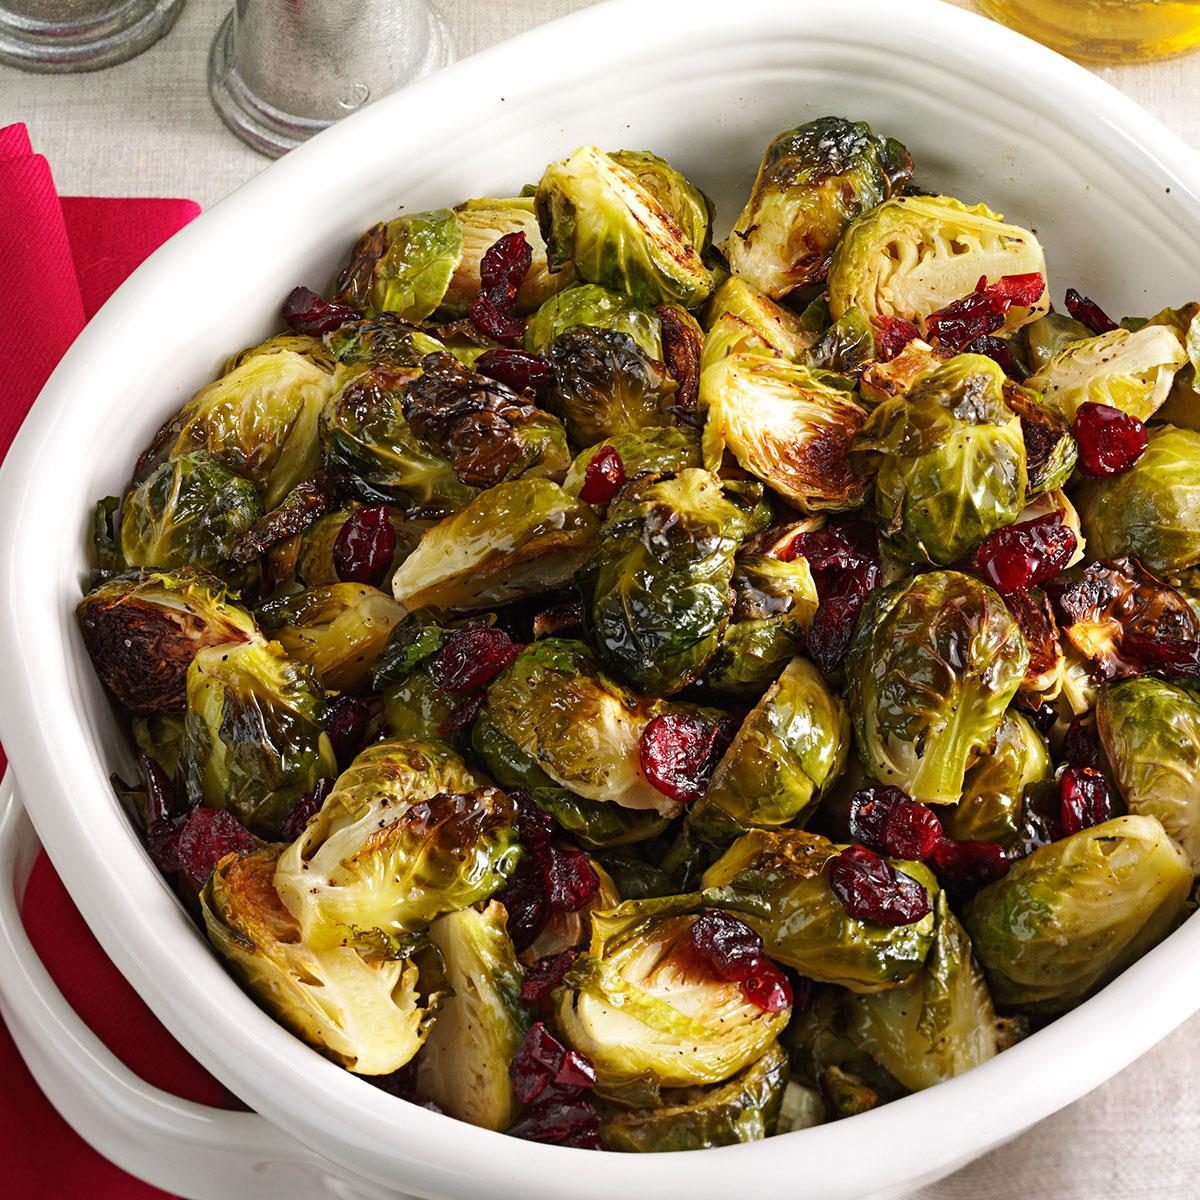 https://www.tasteofhome.com/wp-content/uploads/2018/01/Roasted-Brussels-Sprouts-with-Cranberries_exps173353_TH132104B06_27_5bC_RMS.jpg